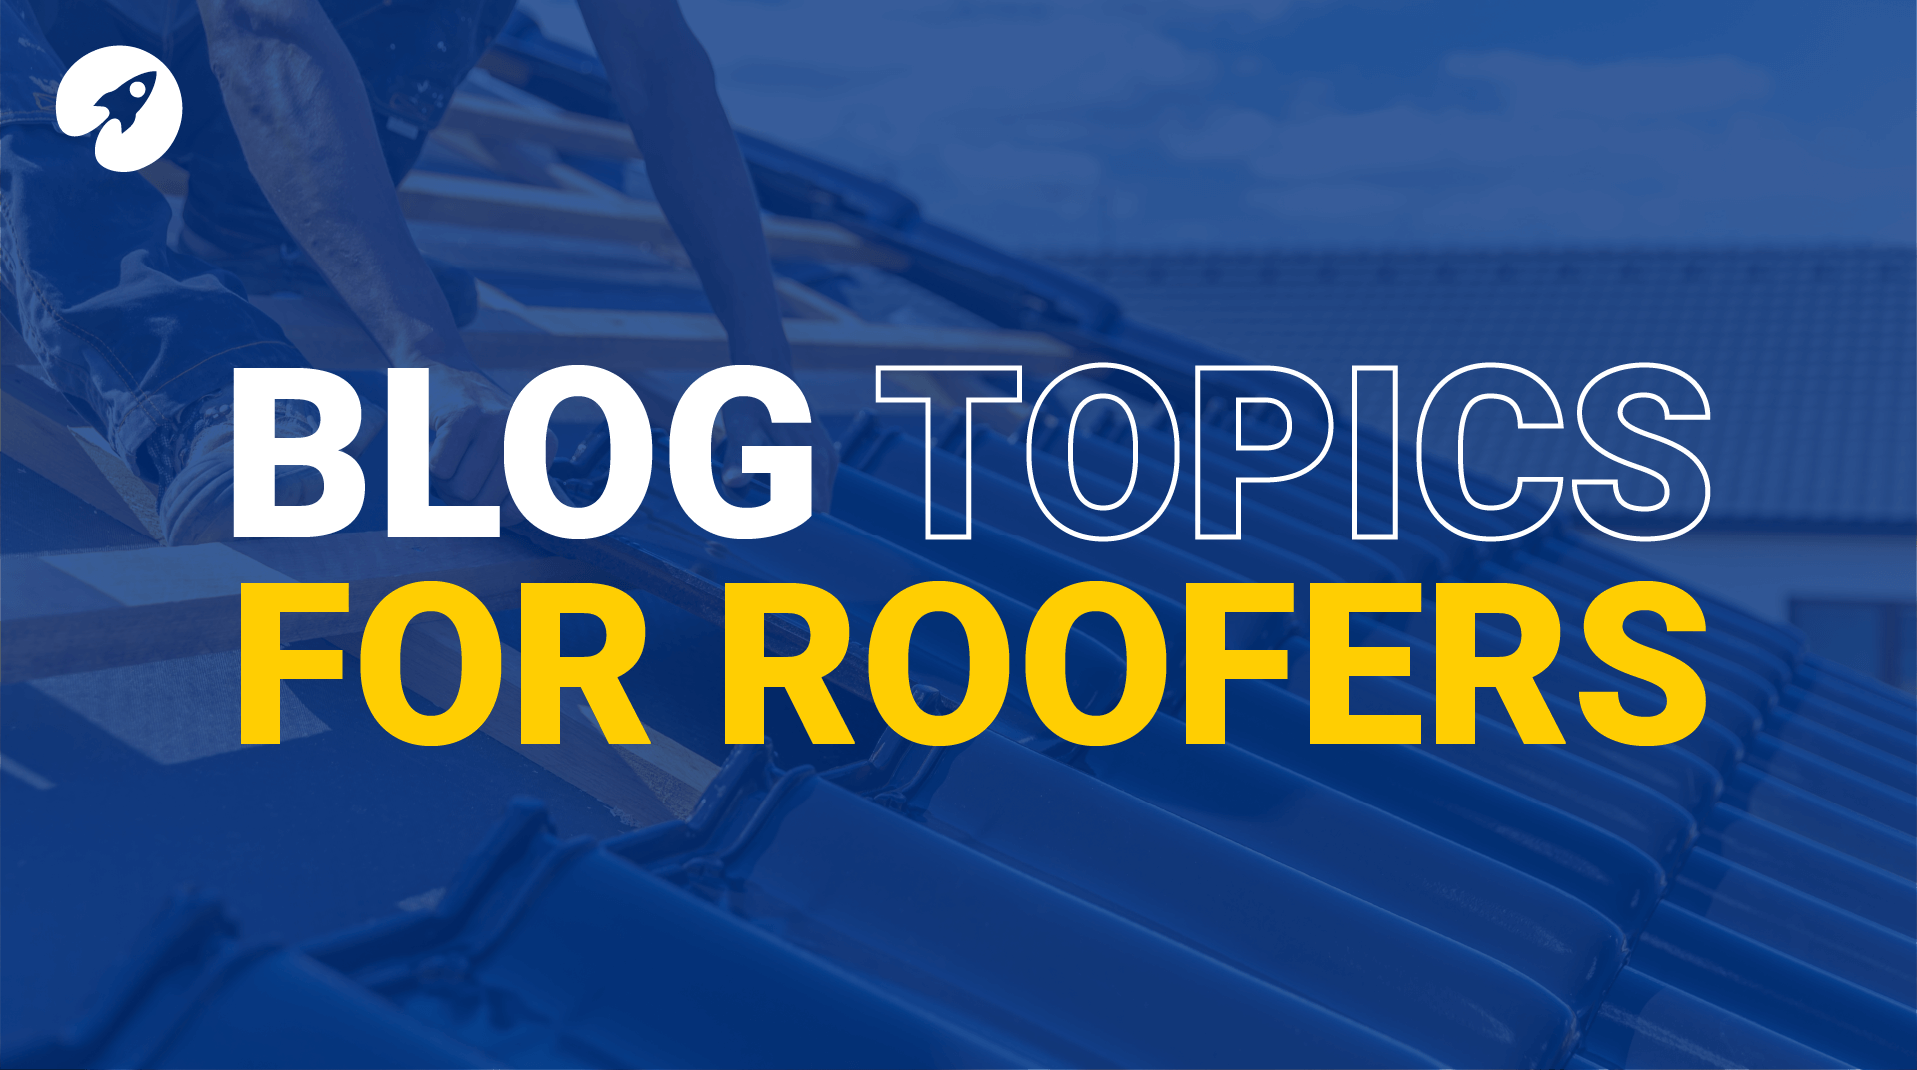 Roofing blog topics | 131 blog topics for roofers